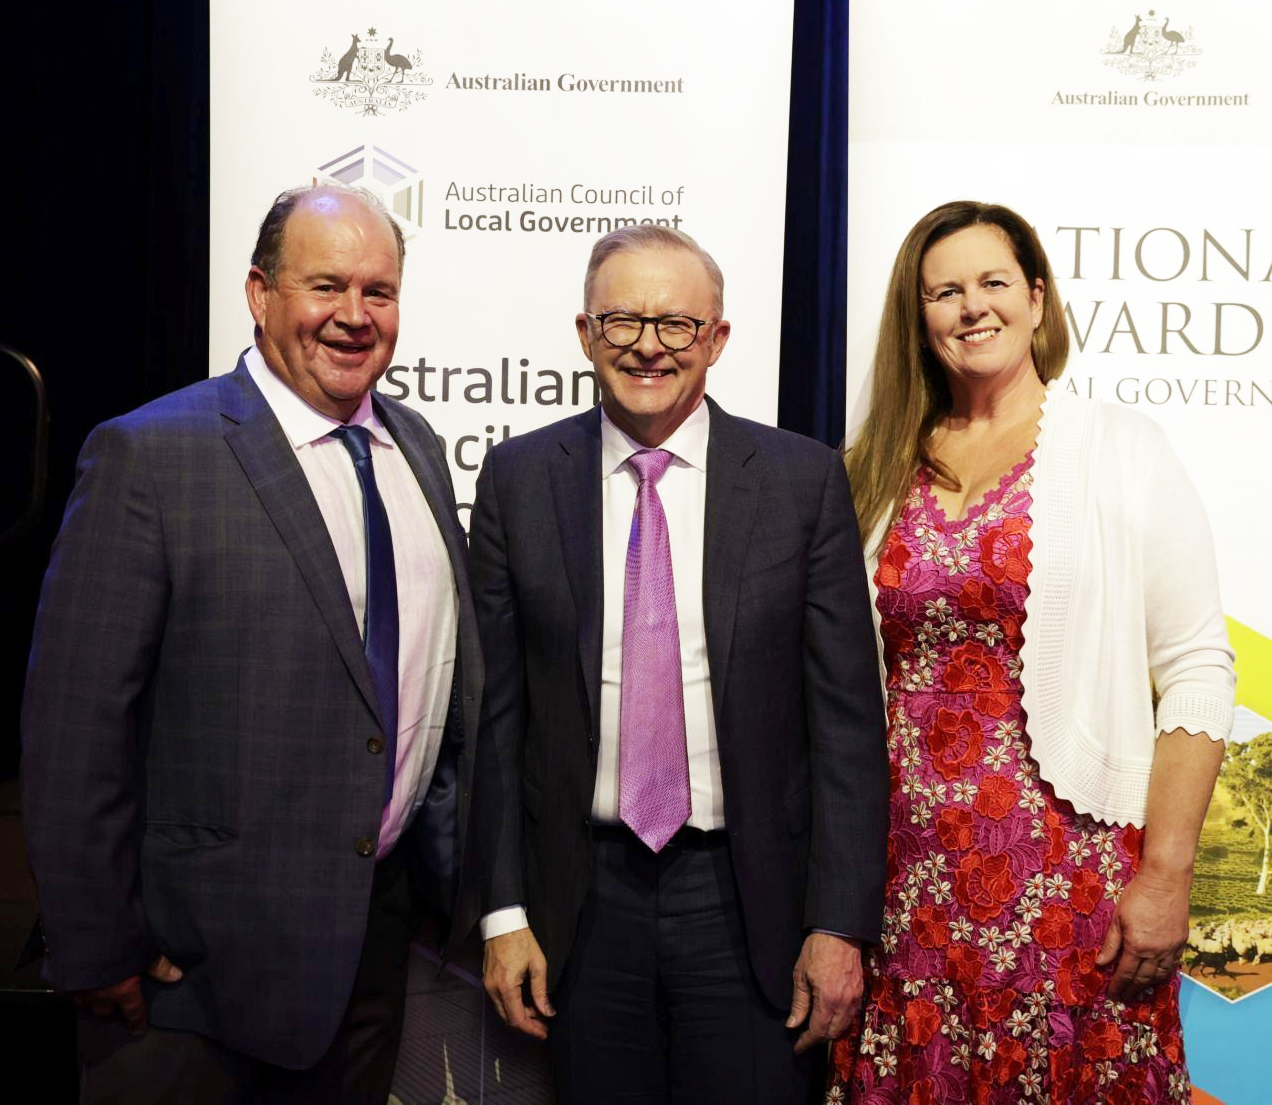 Photo: Shire of Dardanup President Tyrrell Gardiner and Deputy Shire President Ellen Lilly met Australian Prime Minister Anthony Albanese in Canberra last week.